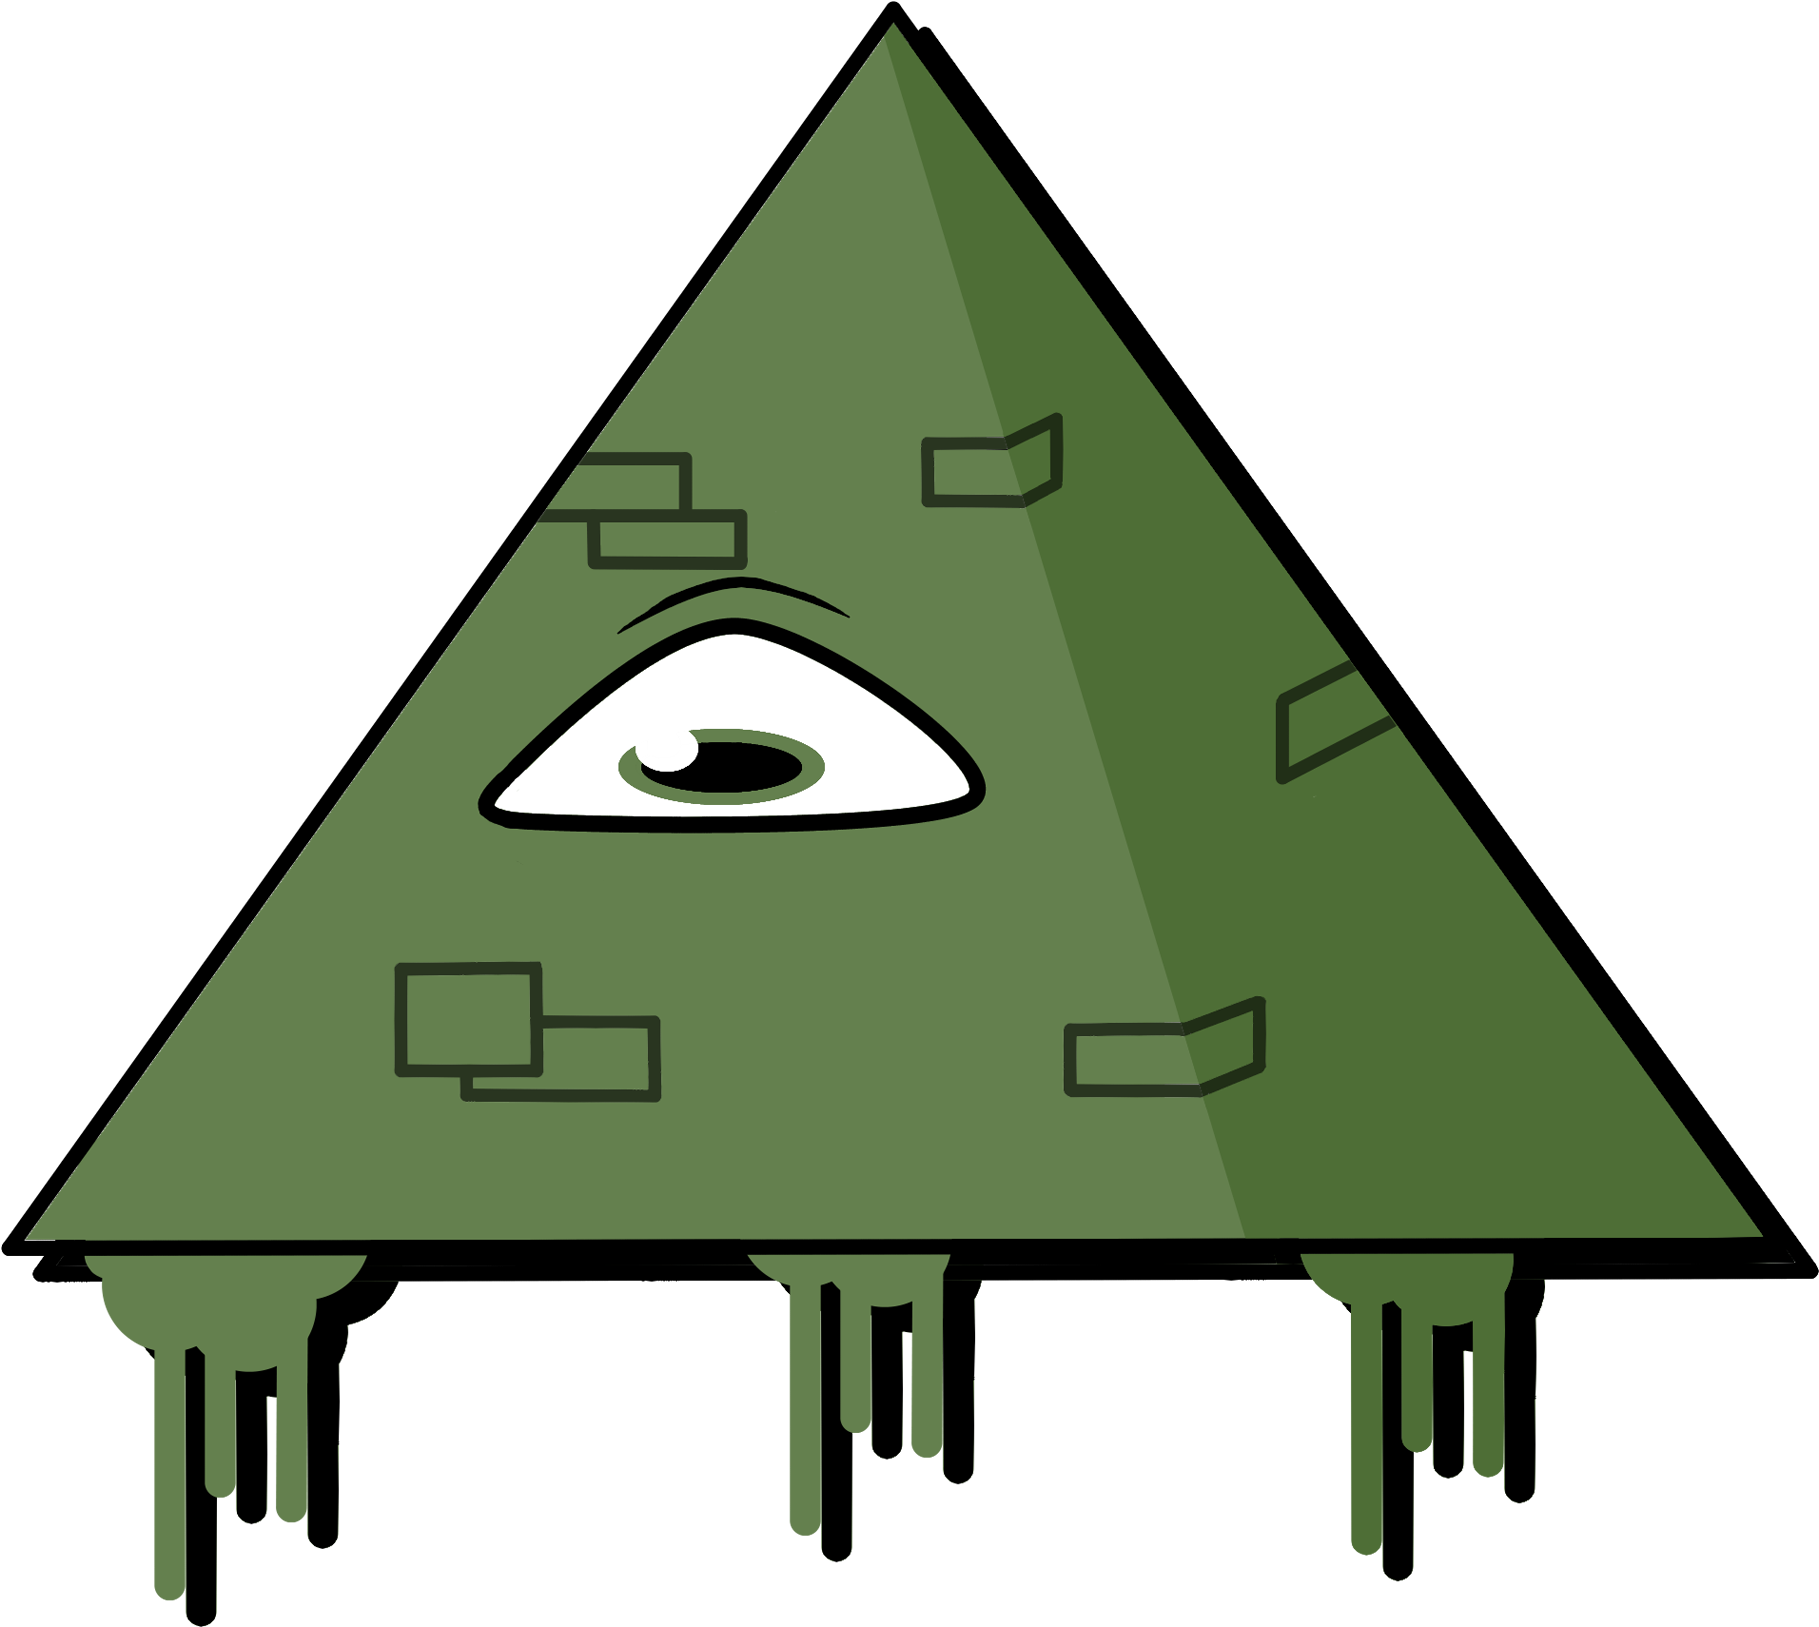 A Green Triangle With A Eye